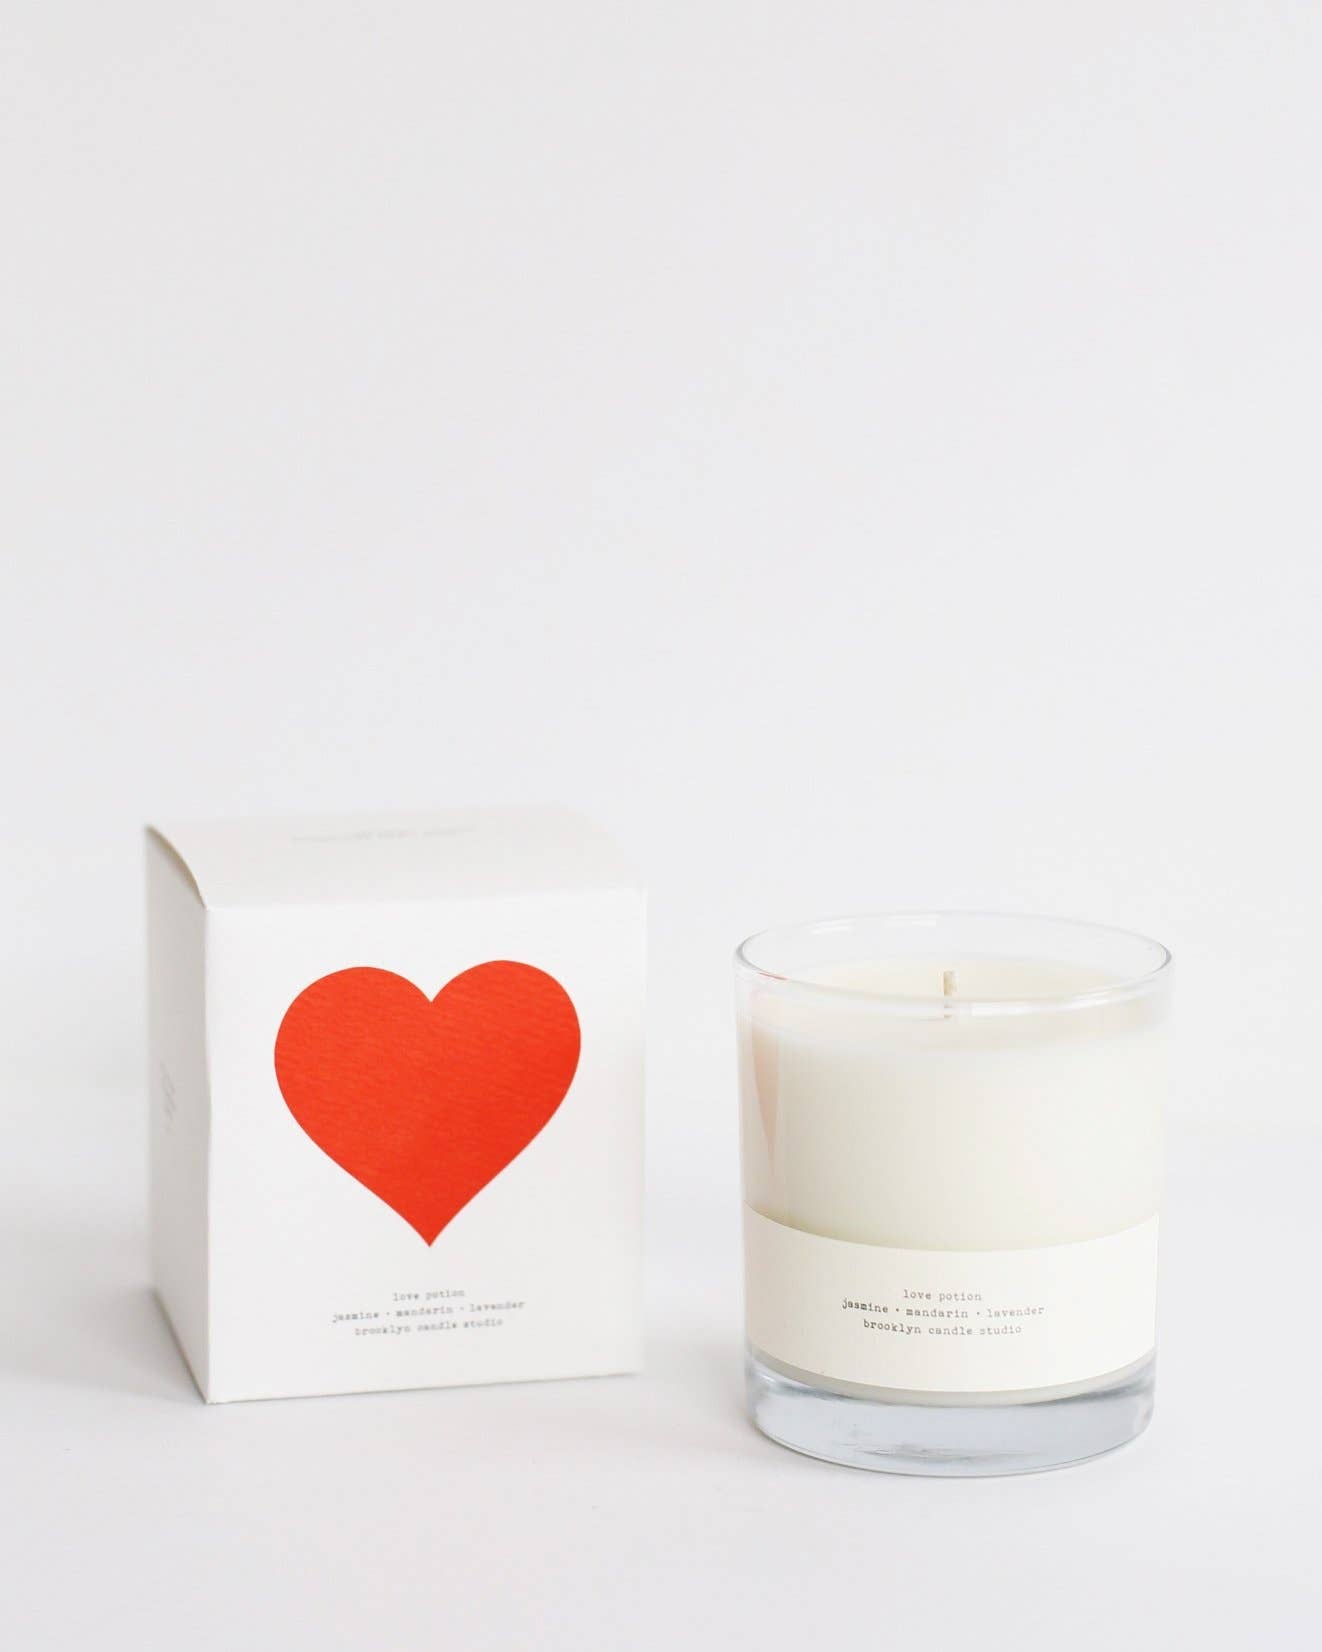 The Love Potion Boxed Candle by Brooklyn Candle Studio